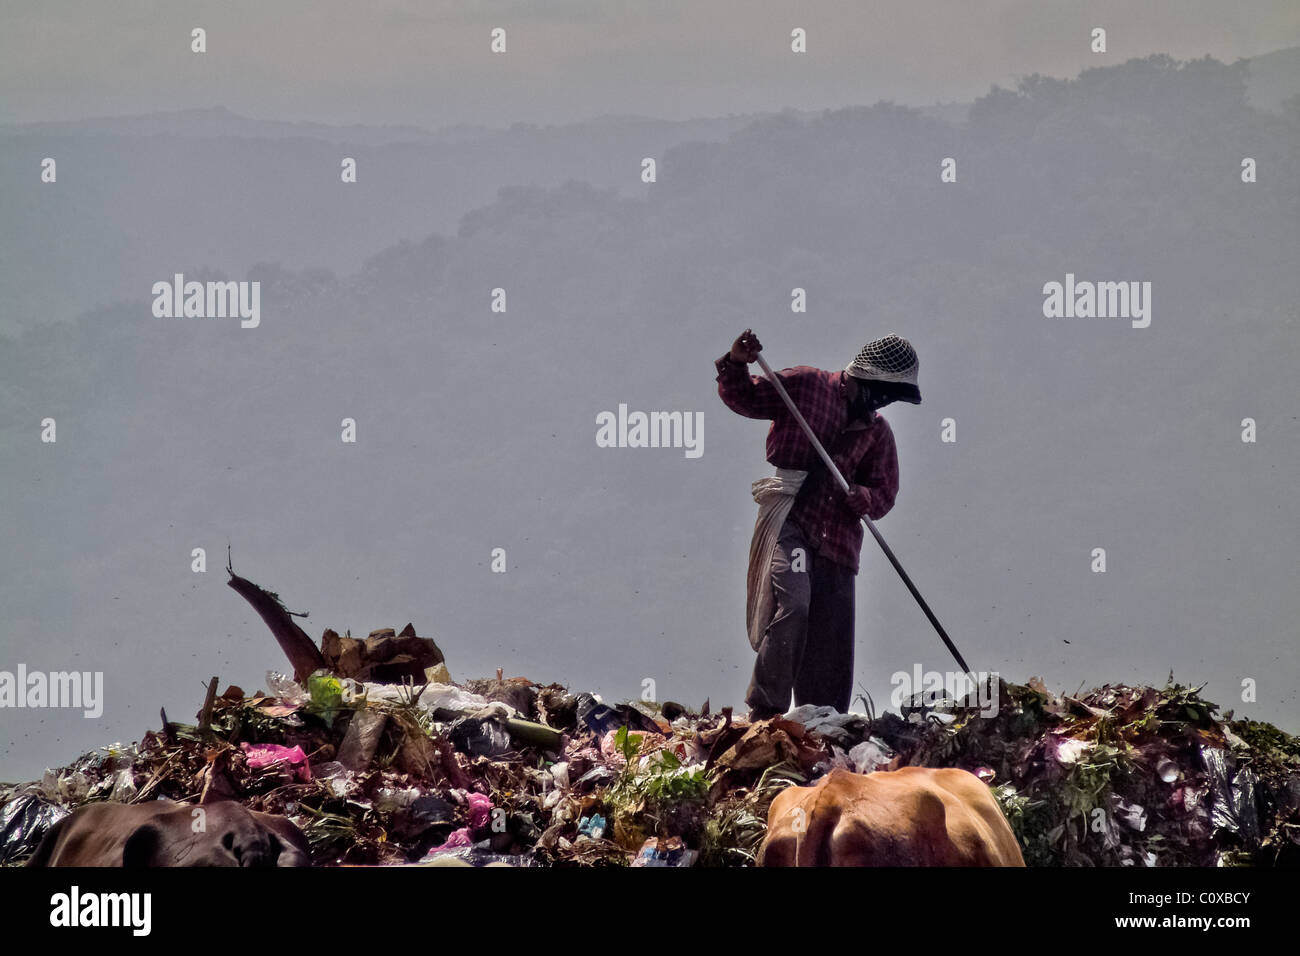 A Nicaraguan man recollects trash for recycling in the garbage dump La Chureca, Managua, Nicaragua. Stock Photo